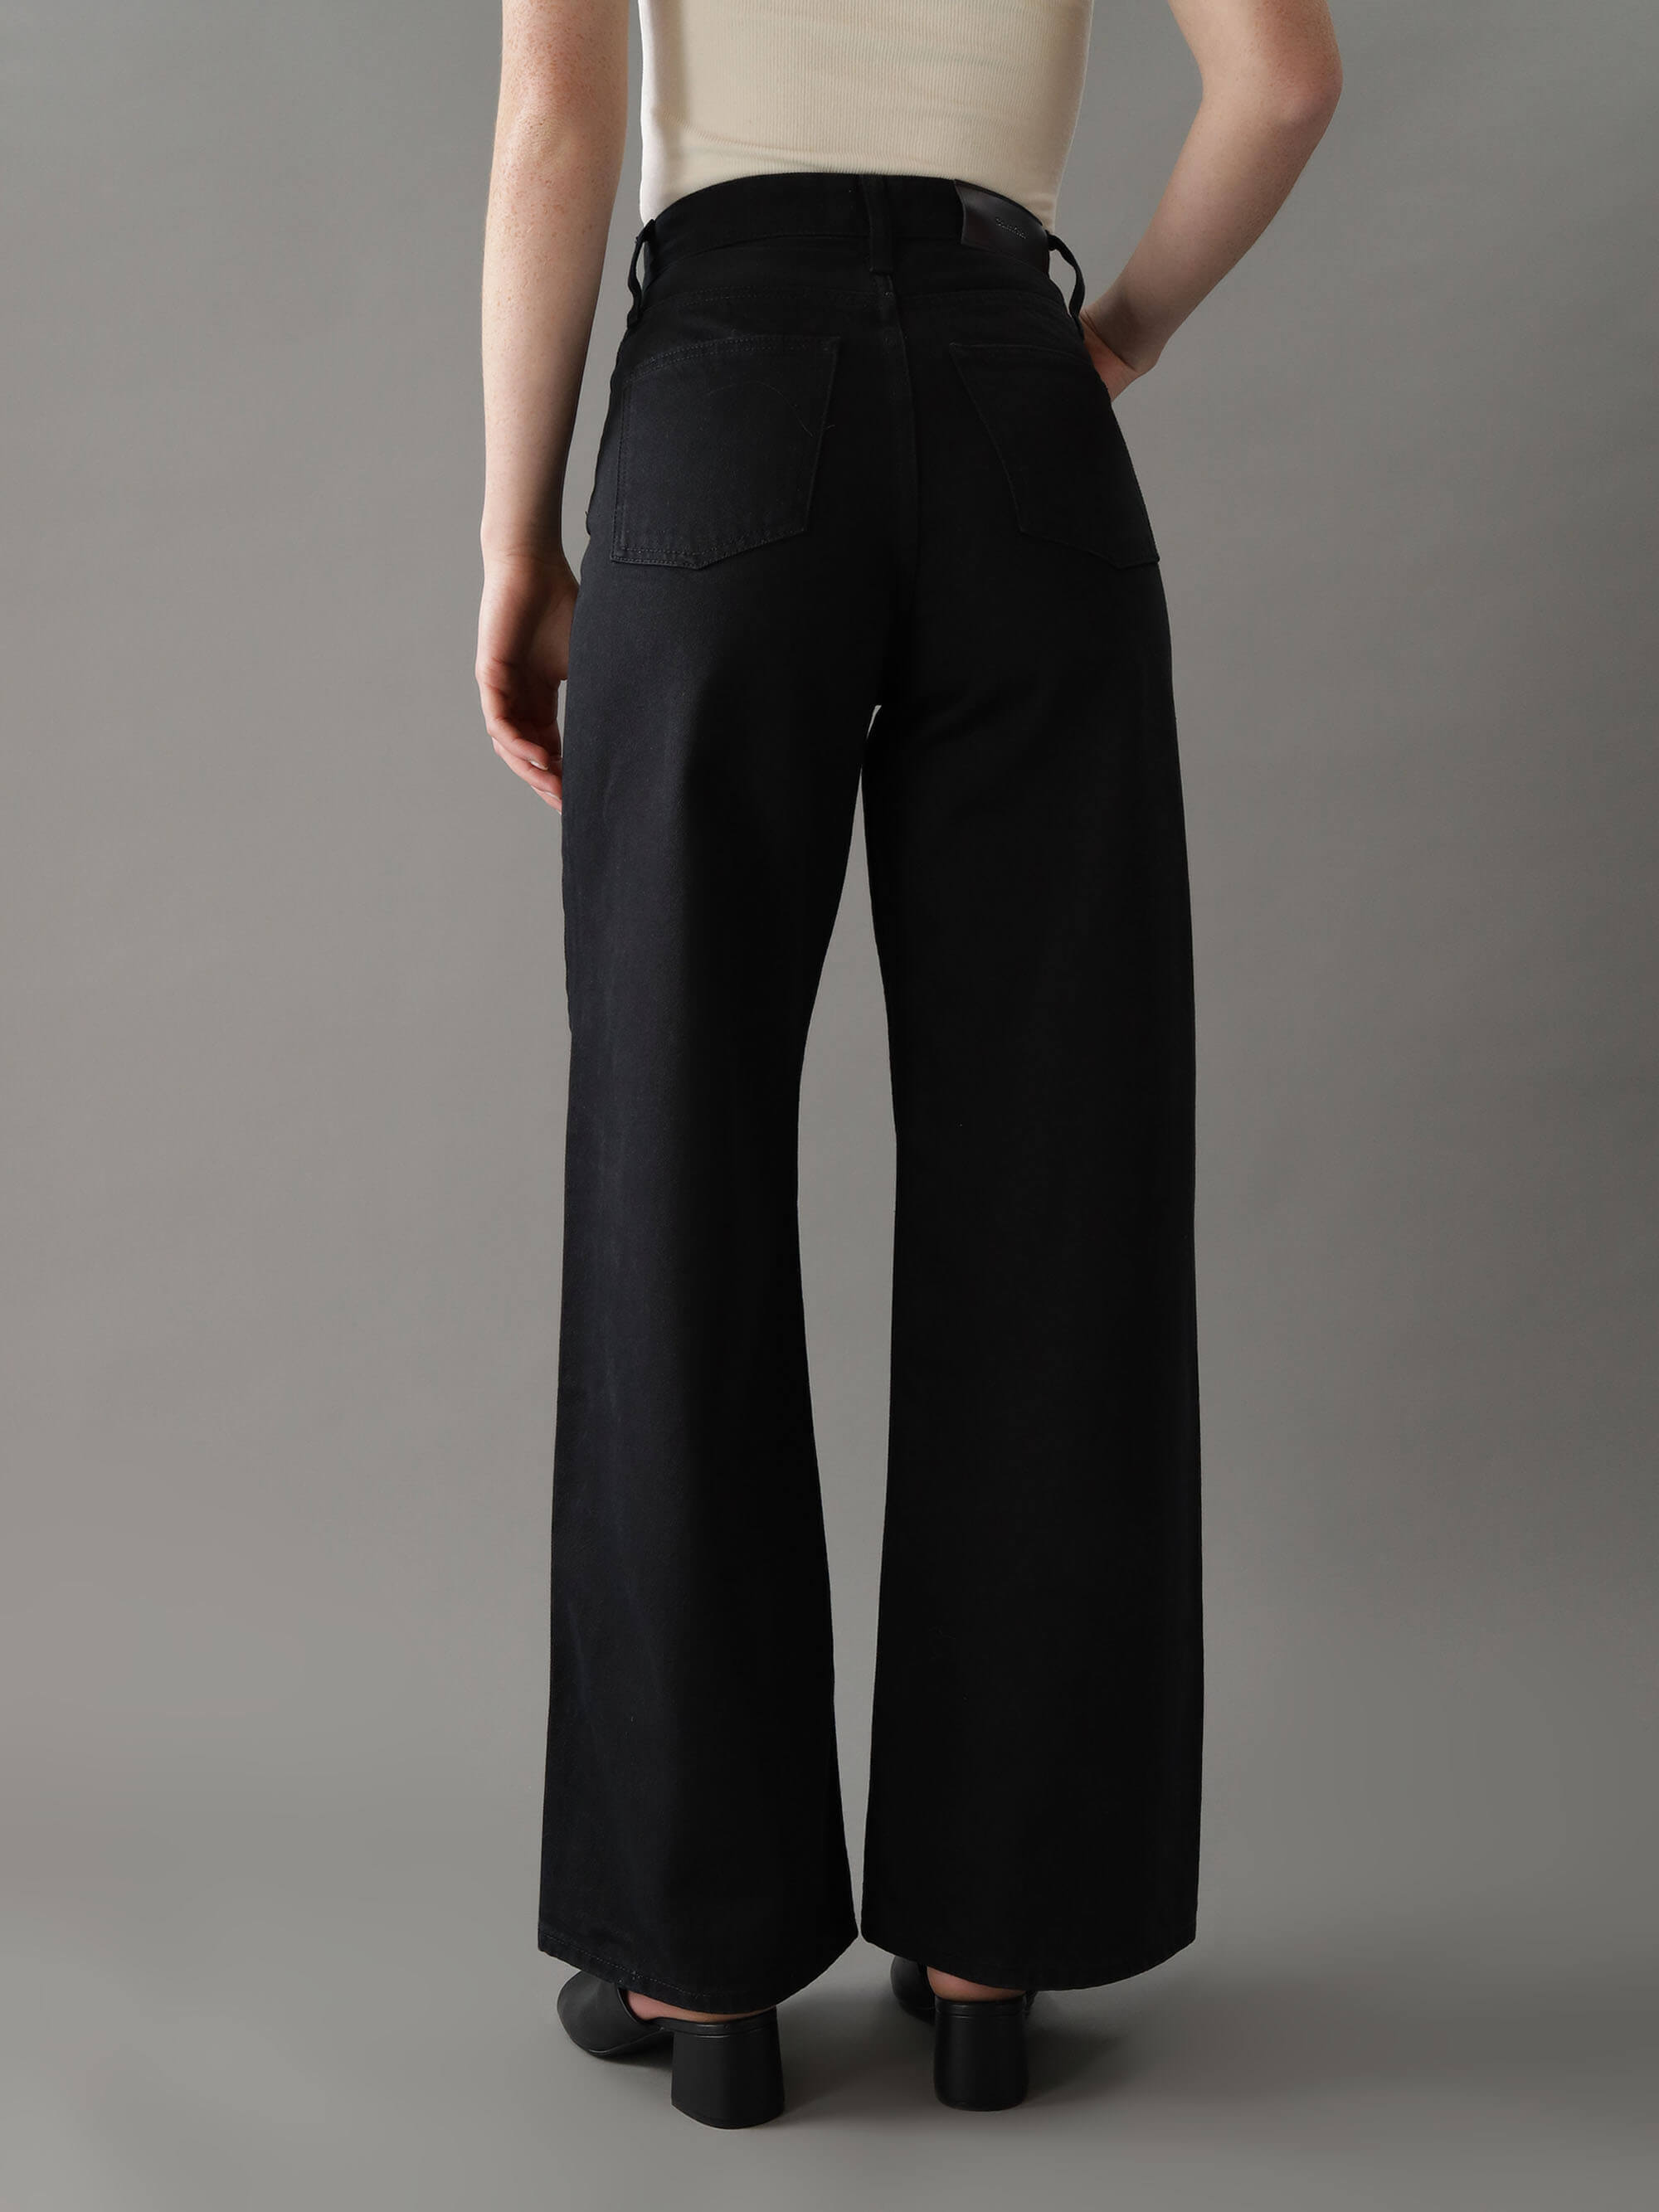 Jeans Calvin Klein High Rise Wide Leg Mujer Negro